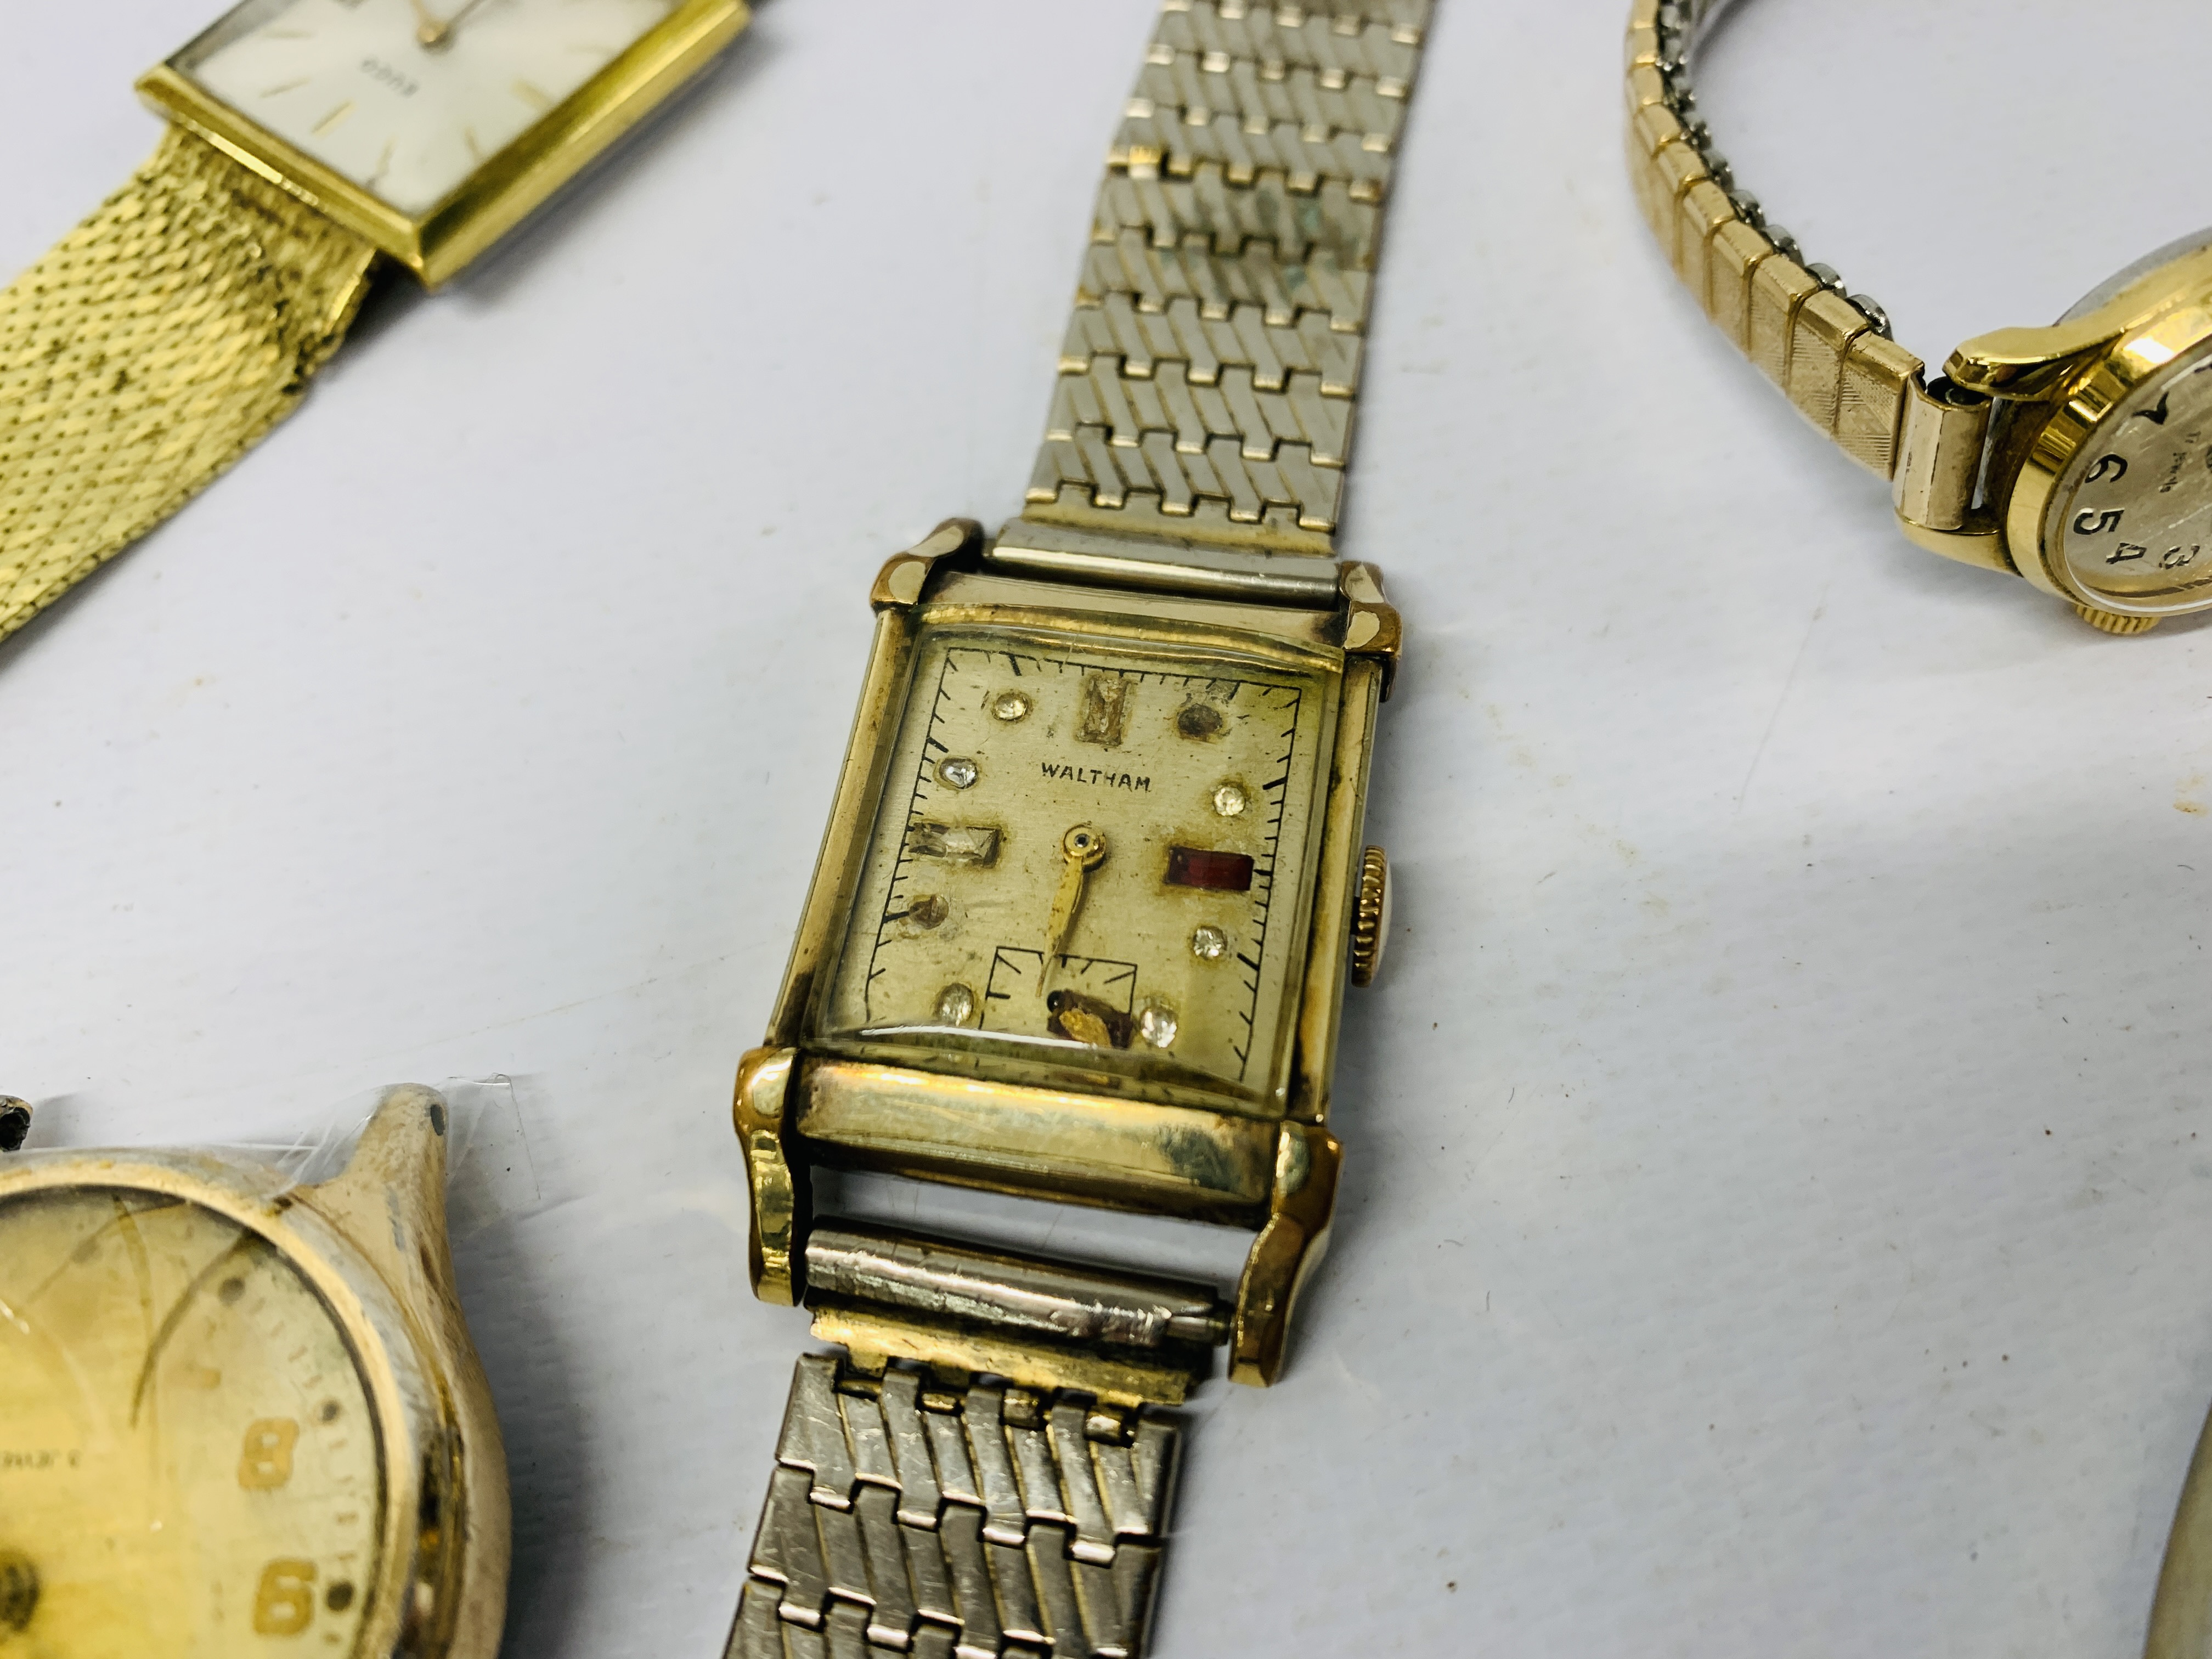 7 X ASSORTED WATCHES / FACES TO INCLUDE WALTHAM - OCEANIC ACCURIST SEKONDA ETC. - Image 7 of 8